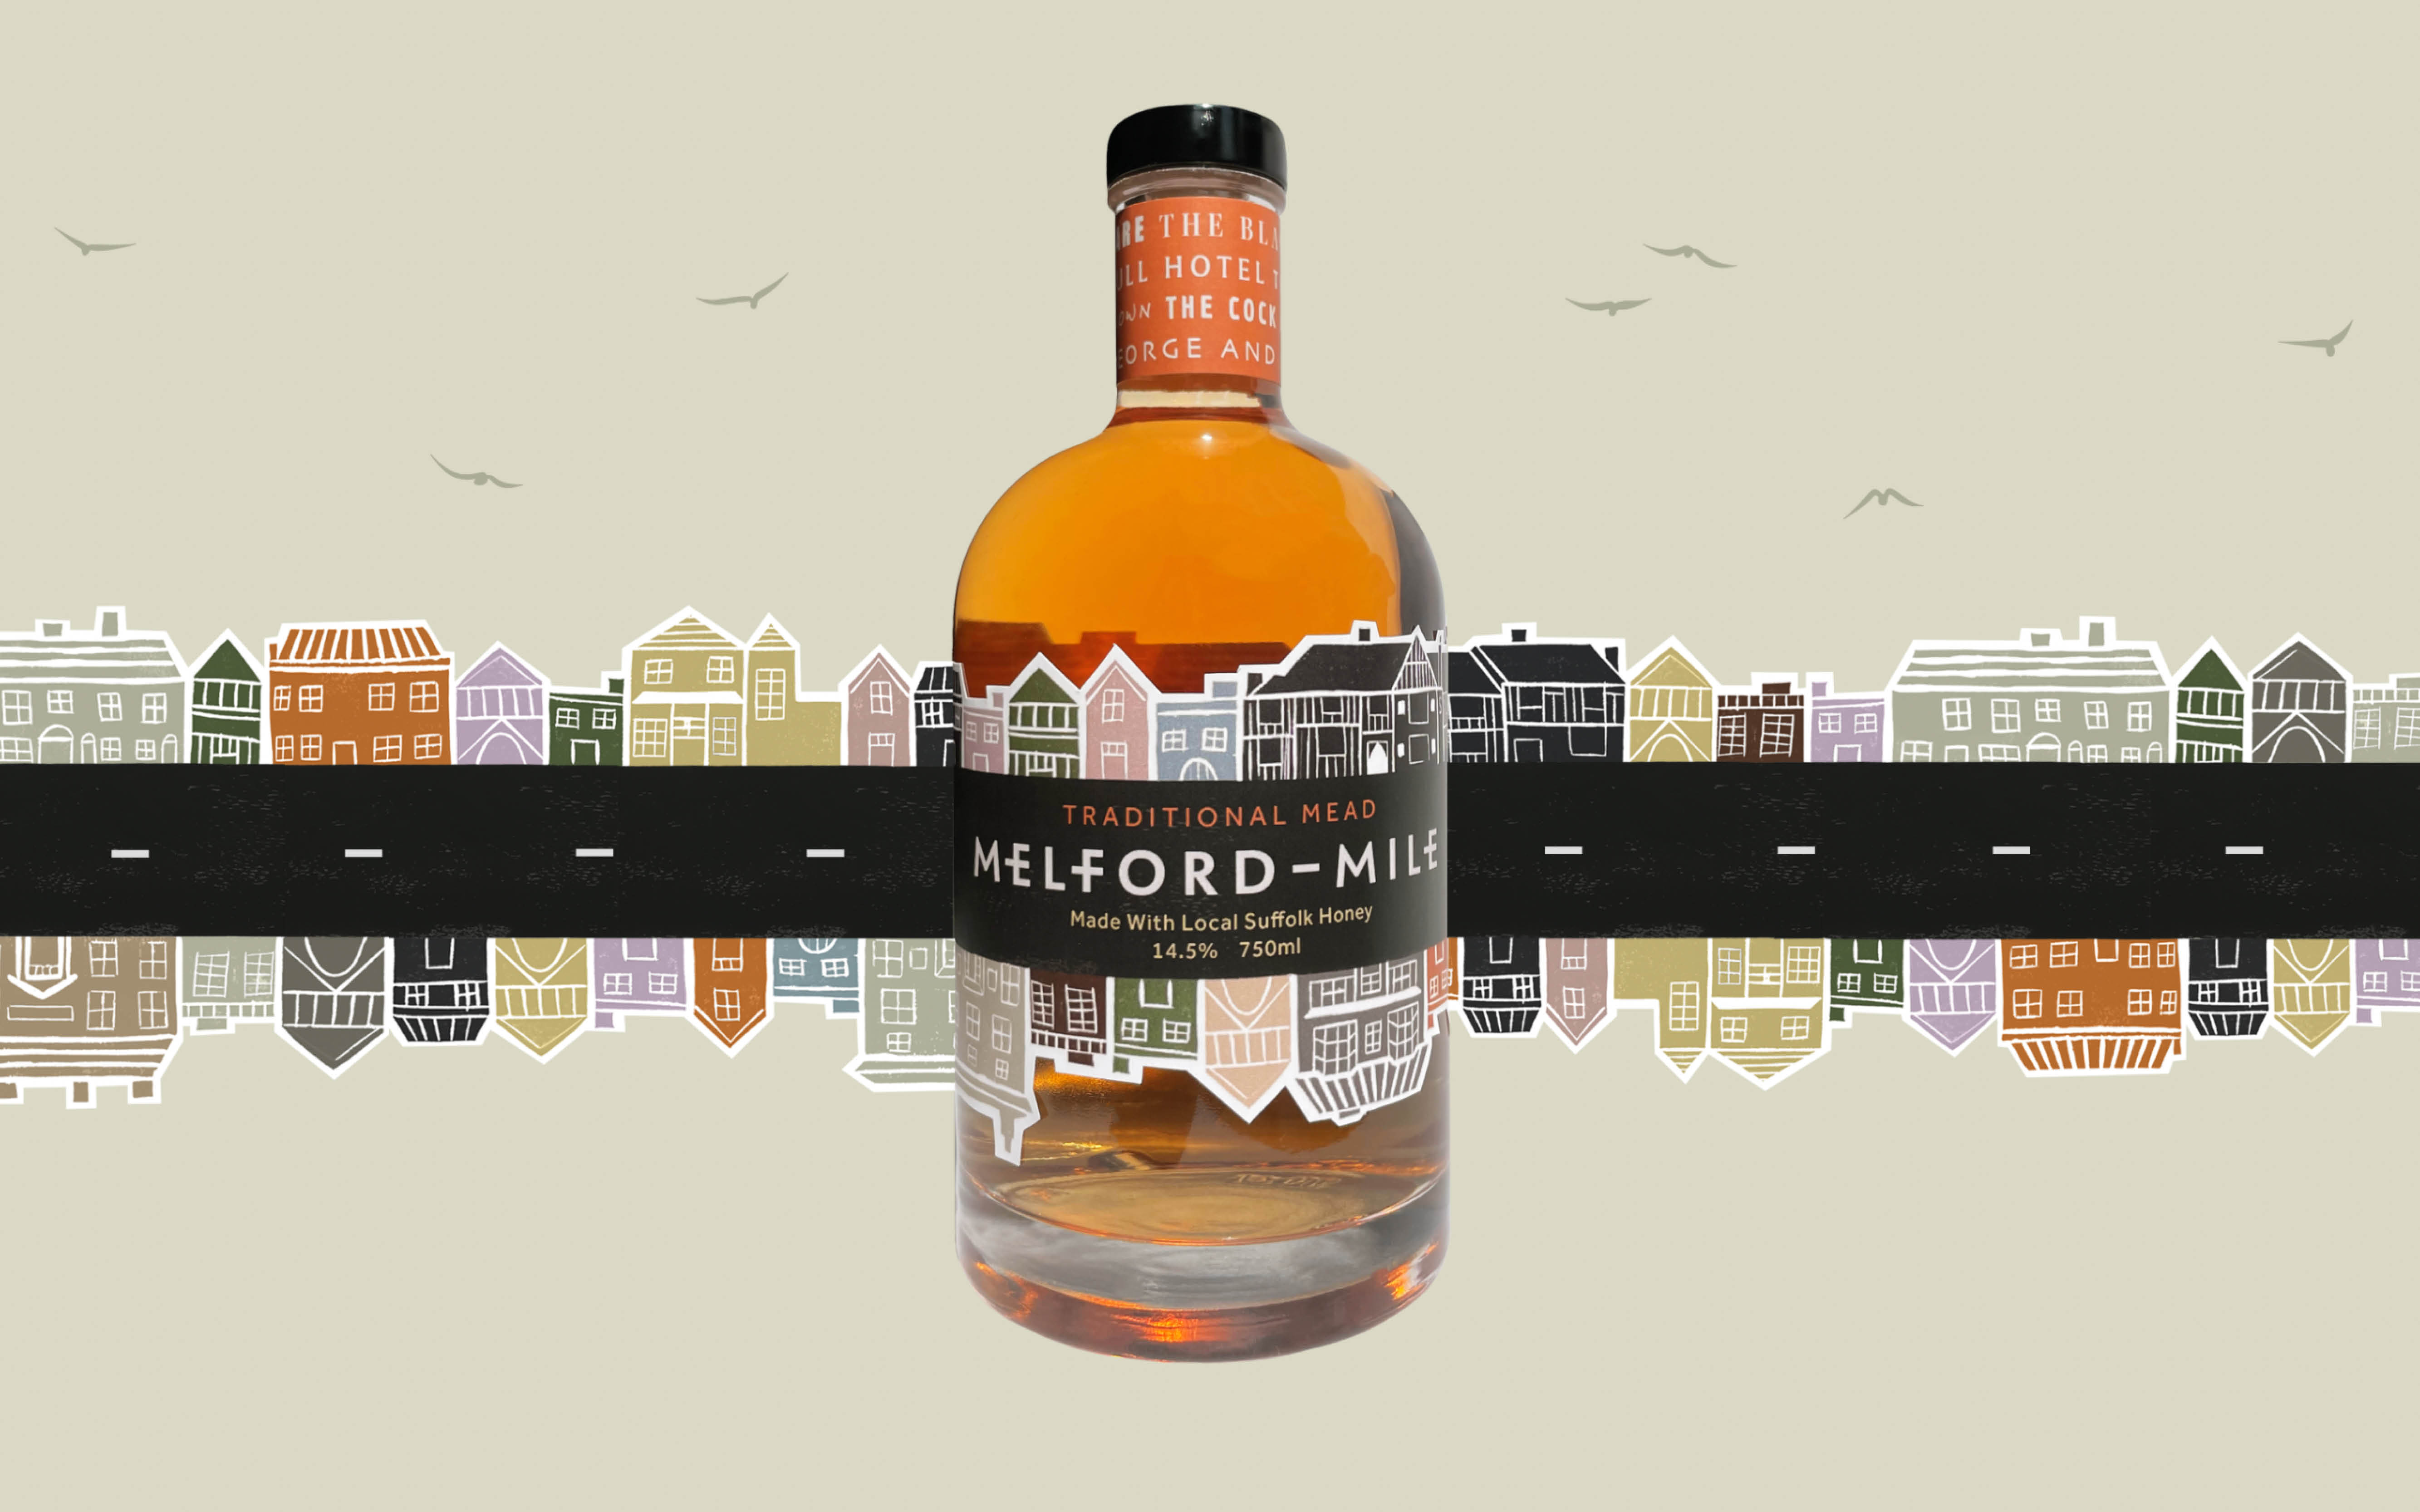 Brand Creation, Melford Mile, by Holly Hughes, showing the bottle design for the brand included buildings and a road that extend beyond the bottle in image.